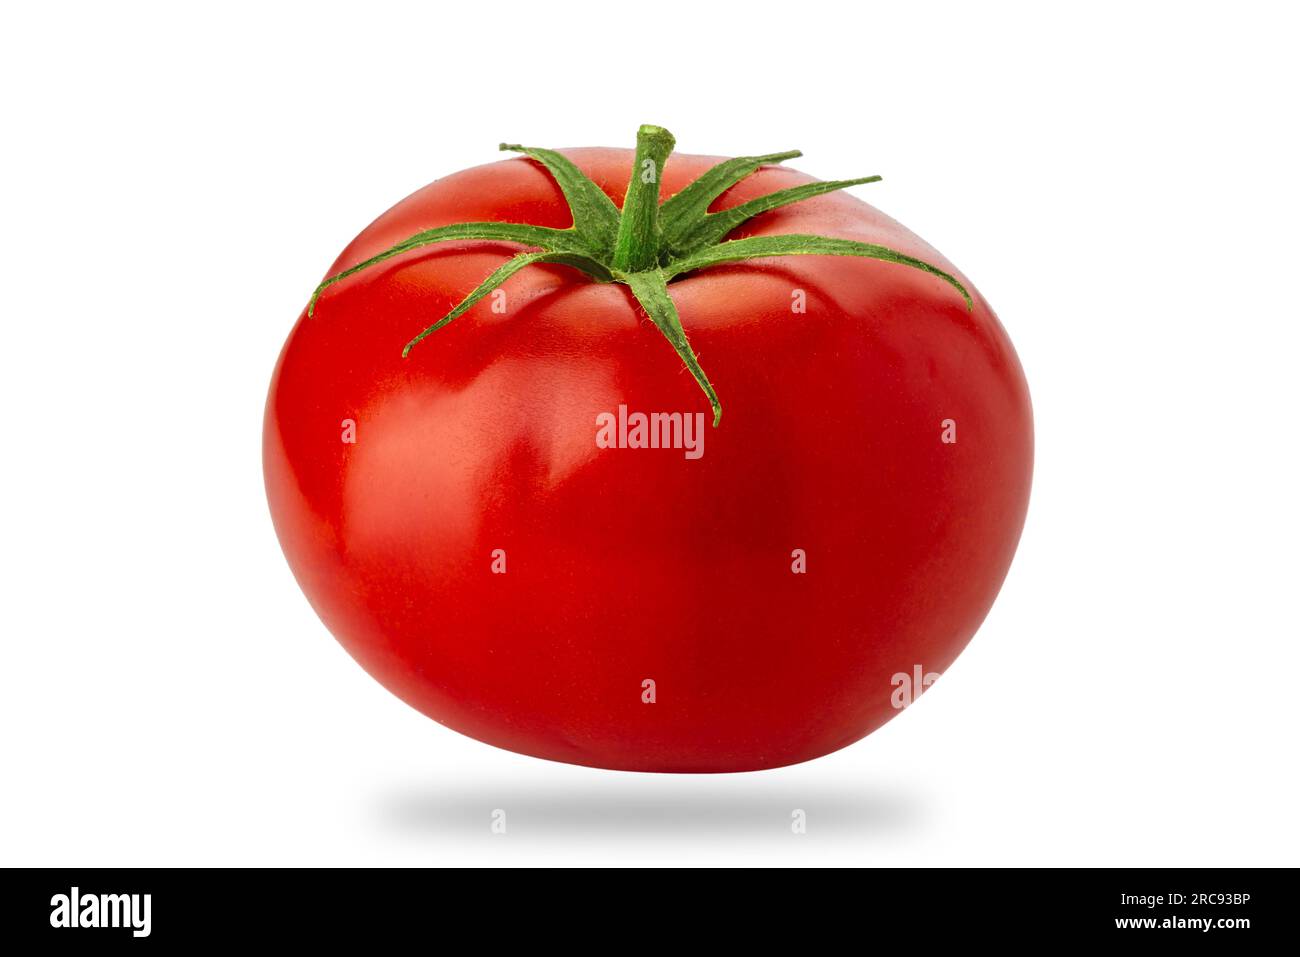 Red tomato isolated on white with clipping path included Stock Photo